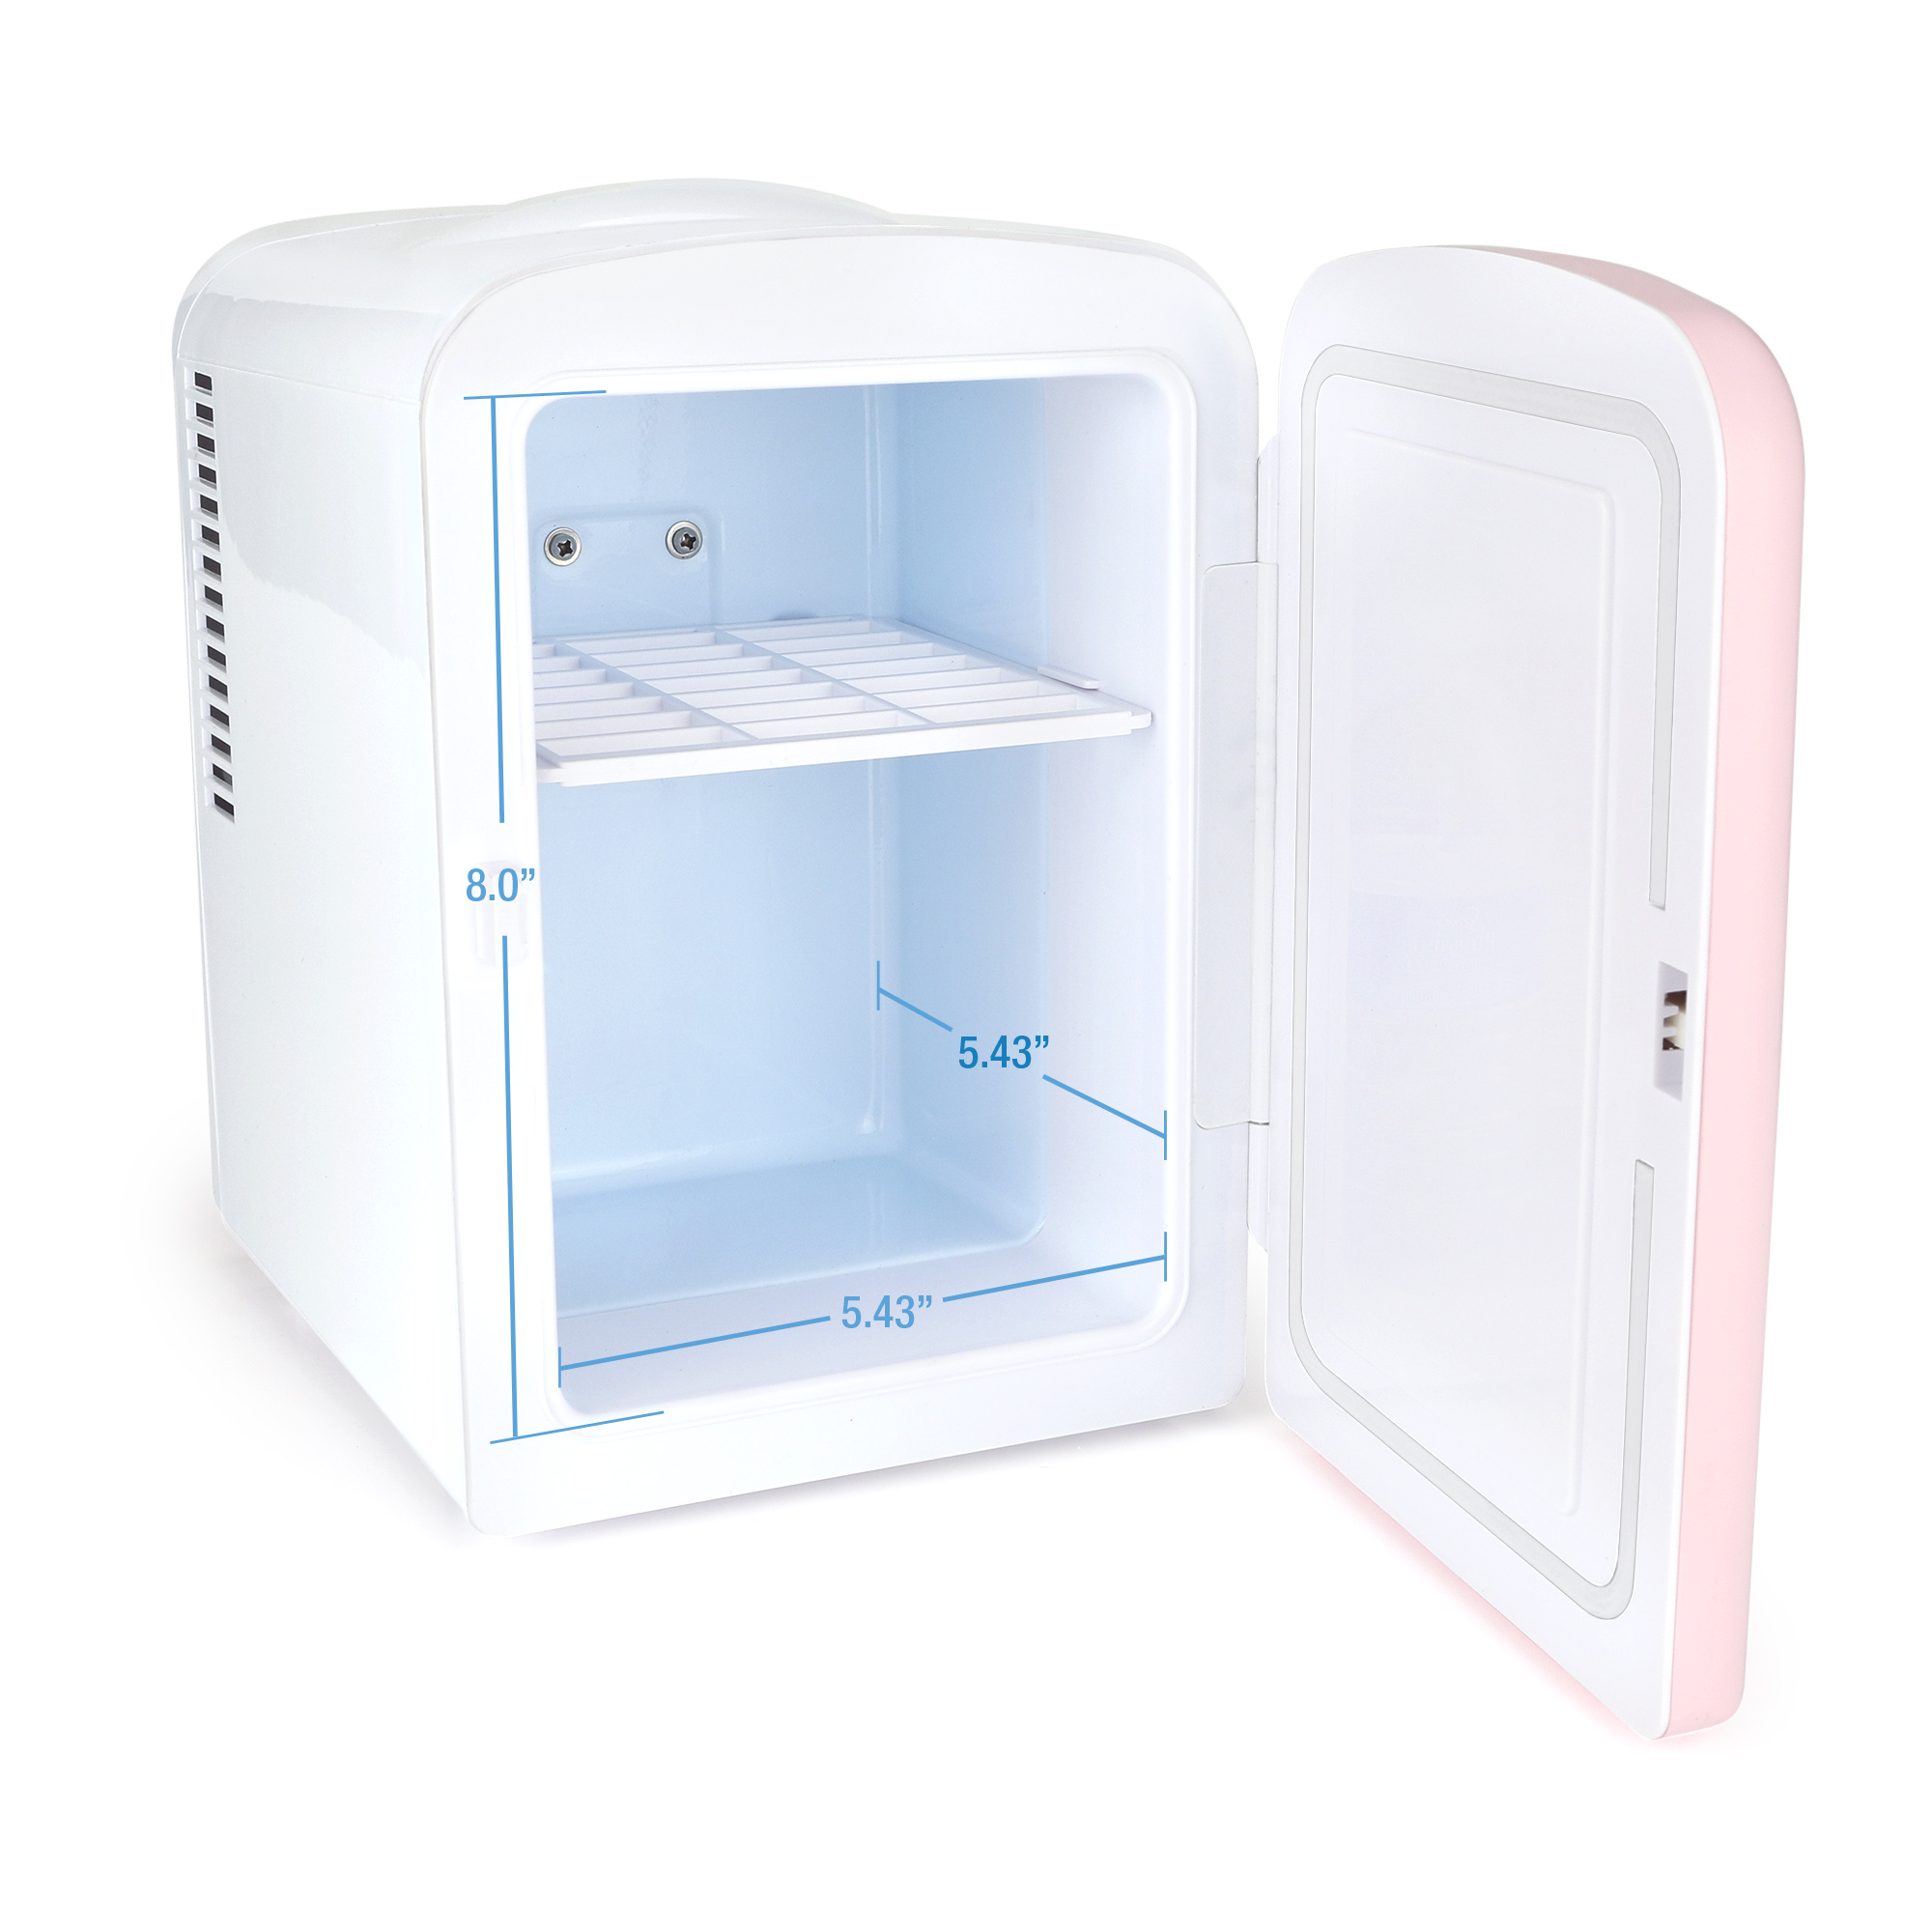 Personal Chiller Portable 6-Can Mini Fridge Small Space Cooler Pink K4106MTPK - image 4 of 11